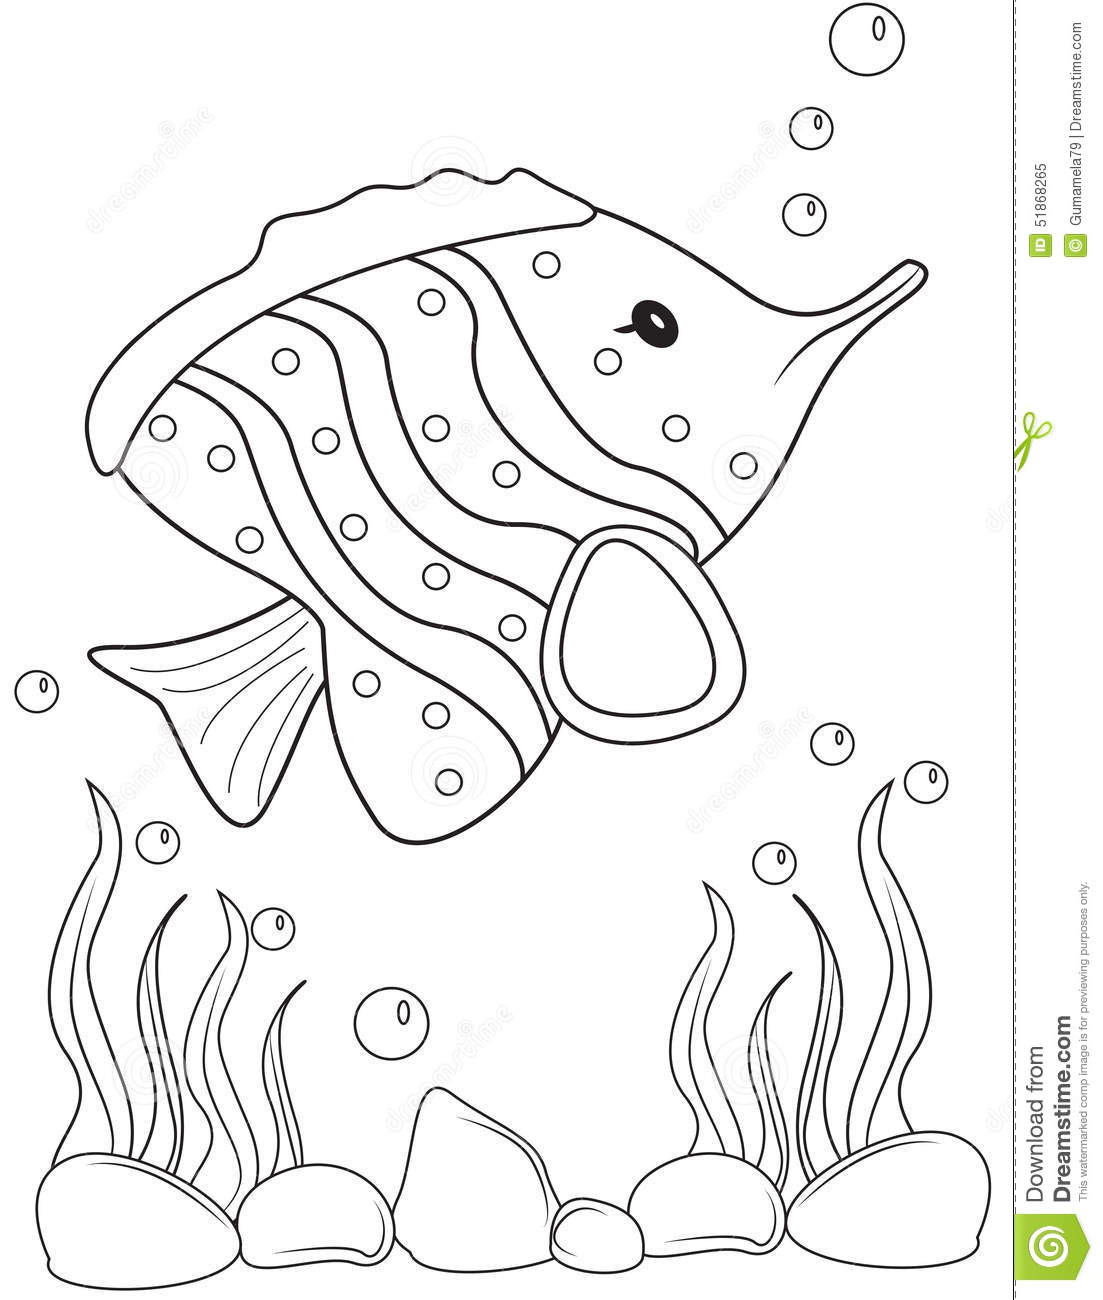 Kids Coloring Pages Fish
 Fish coloring page stock illustration Illustration of